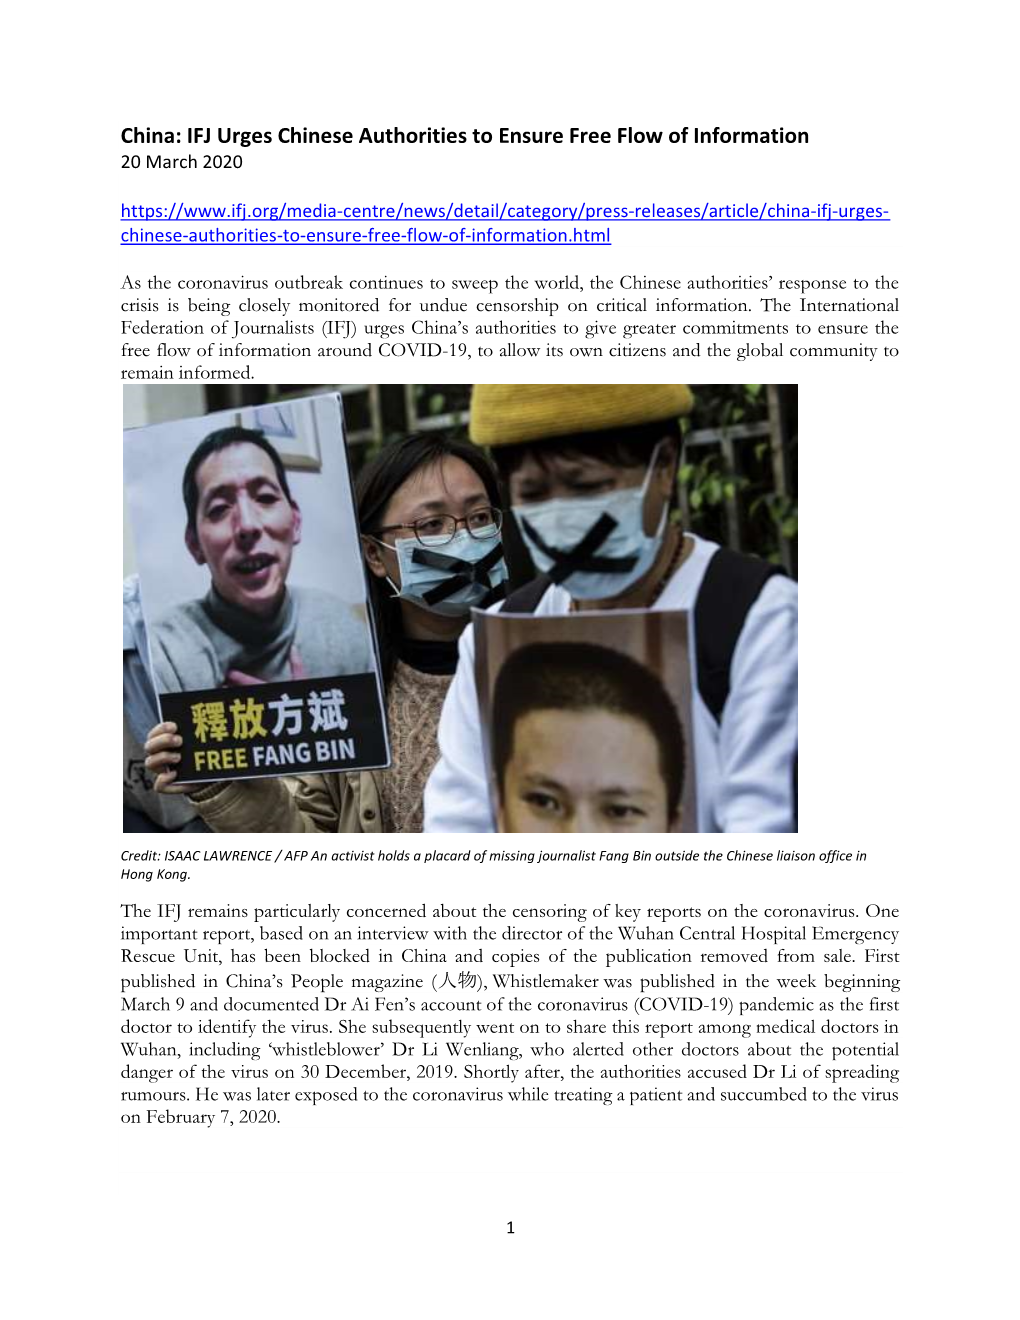 China: IFJ Urges Chinese Authorities to Ensure Free Flow Of